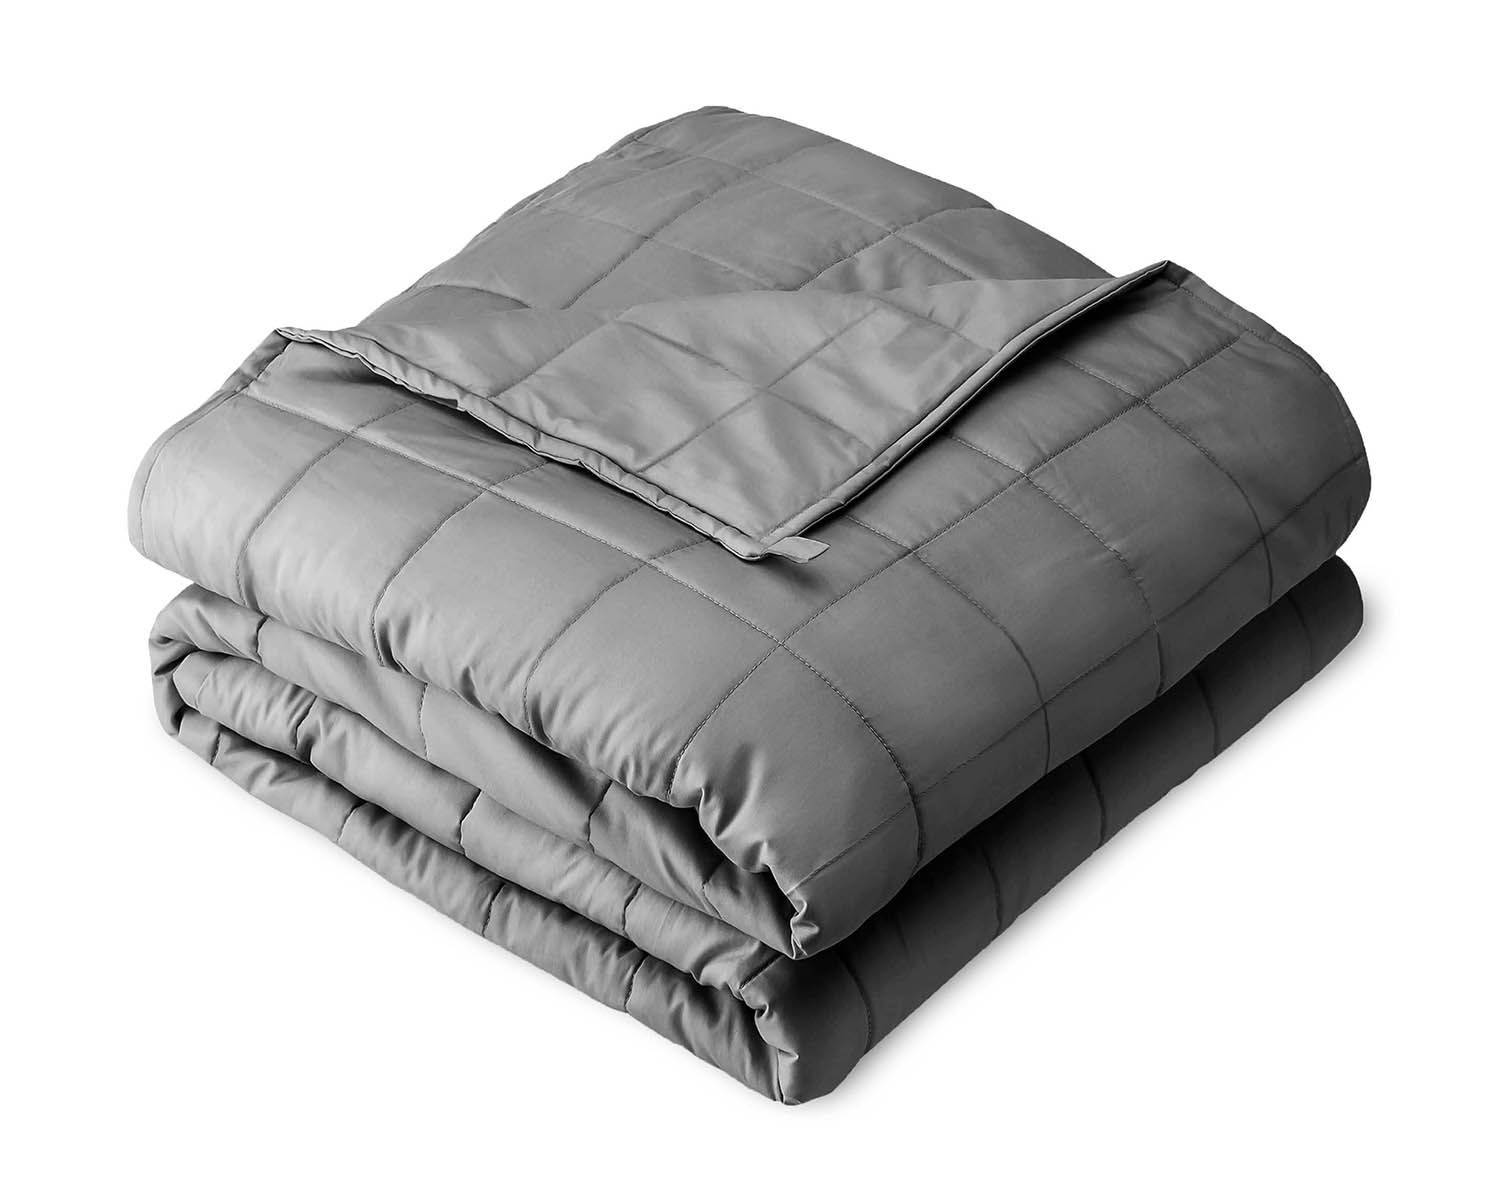 get-the-perfect-last-minute-gift-48-weighted-blanket-arrives-in-time-for-christmas